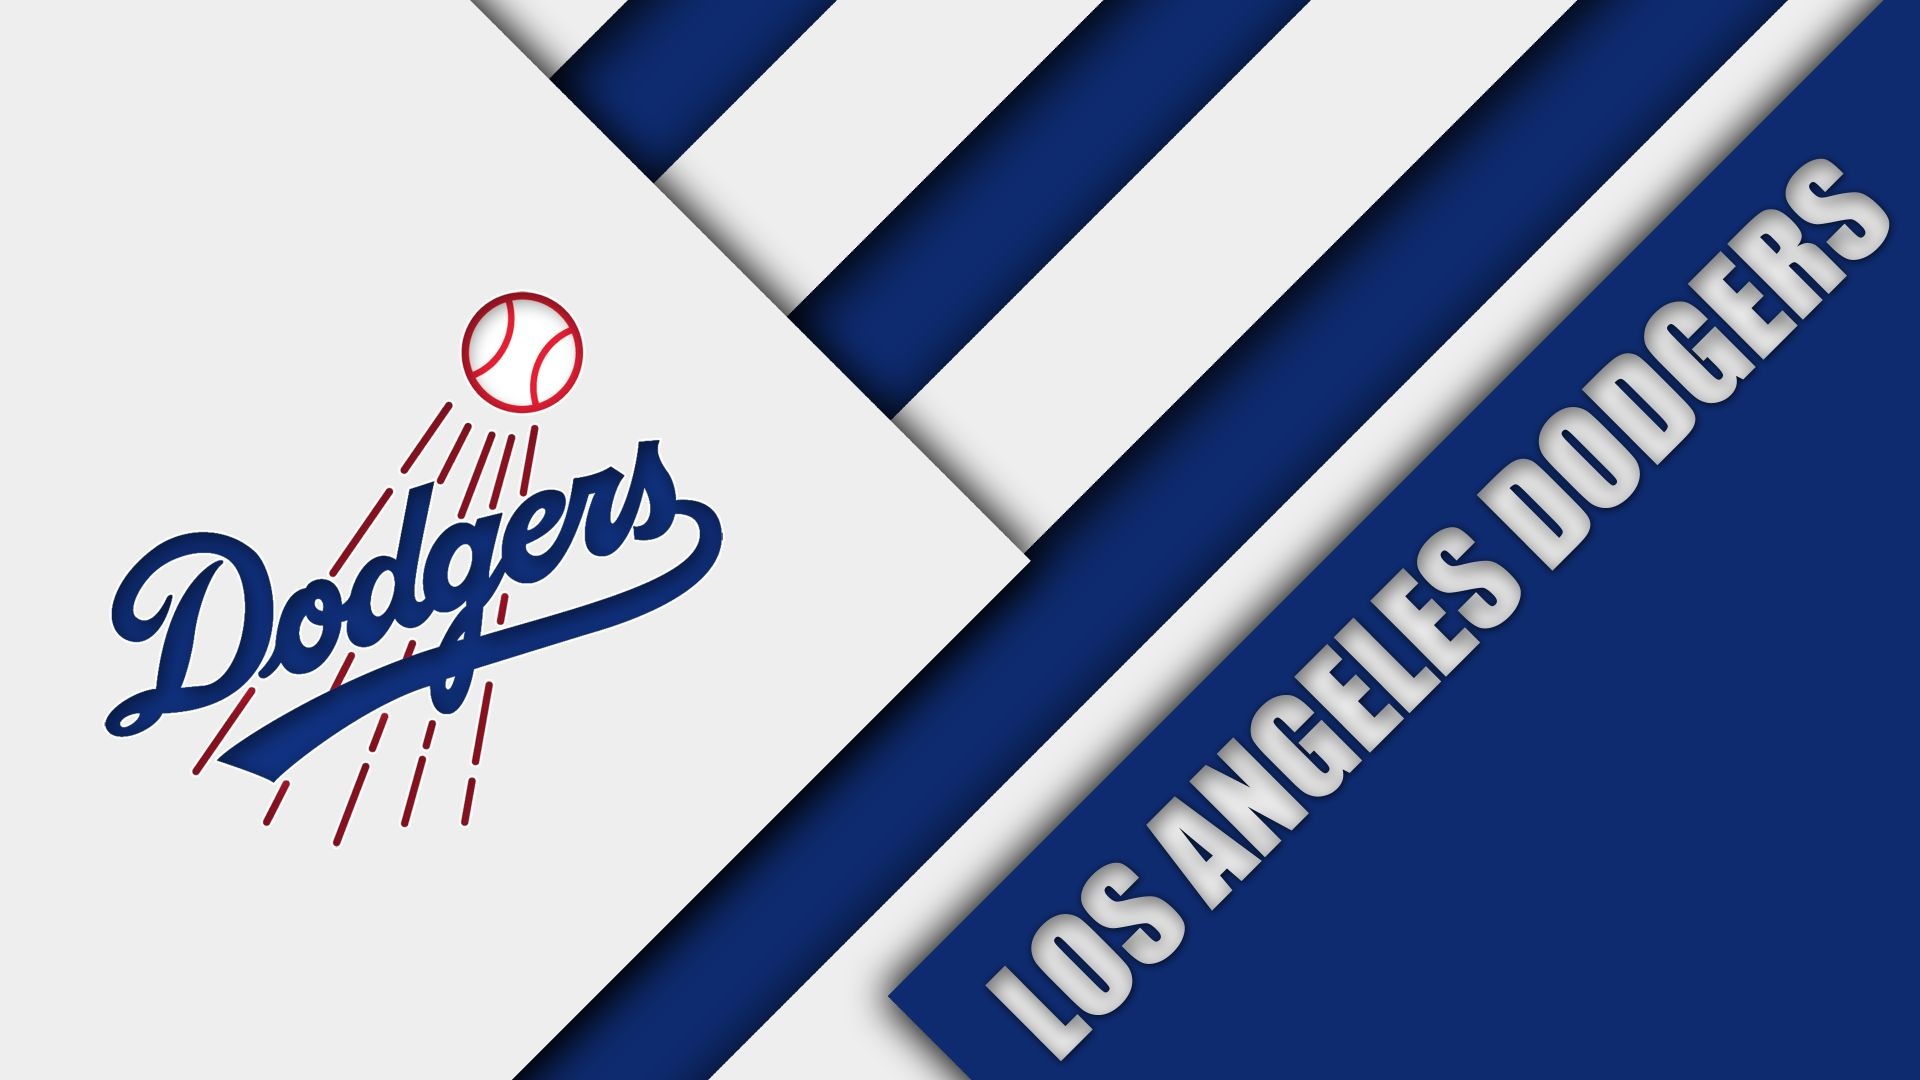 Los Angeles Dodgers, High-quality backgrounds, Sports team pride, Download now, 1920x1080 Full HD Desktop